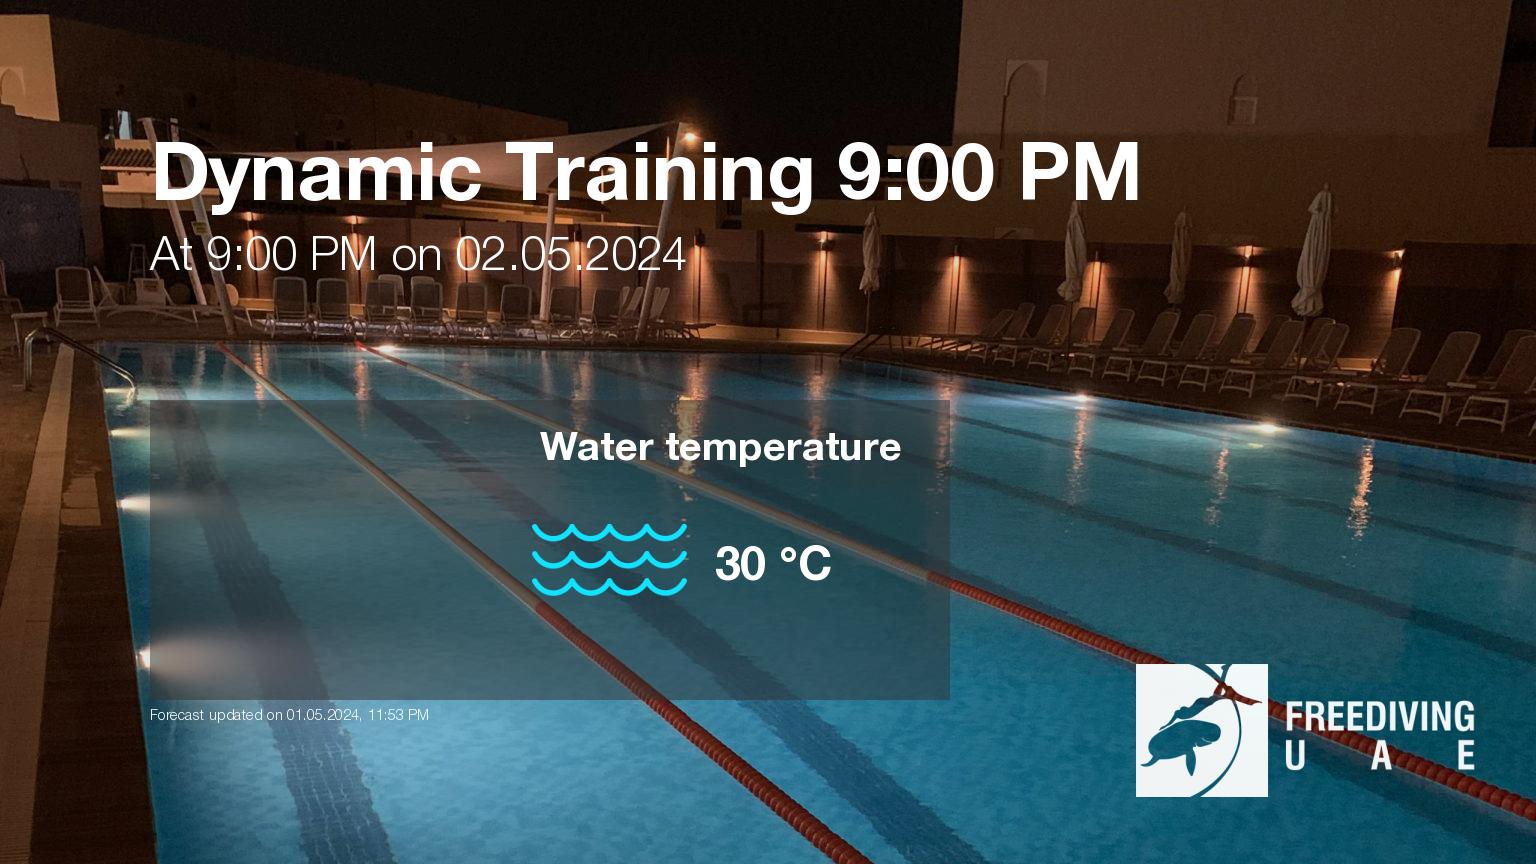 Expected weather during Dynamic Training 9:00 PM on Thu, May 2, at 9:00 PM